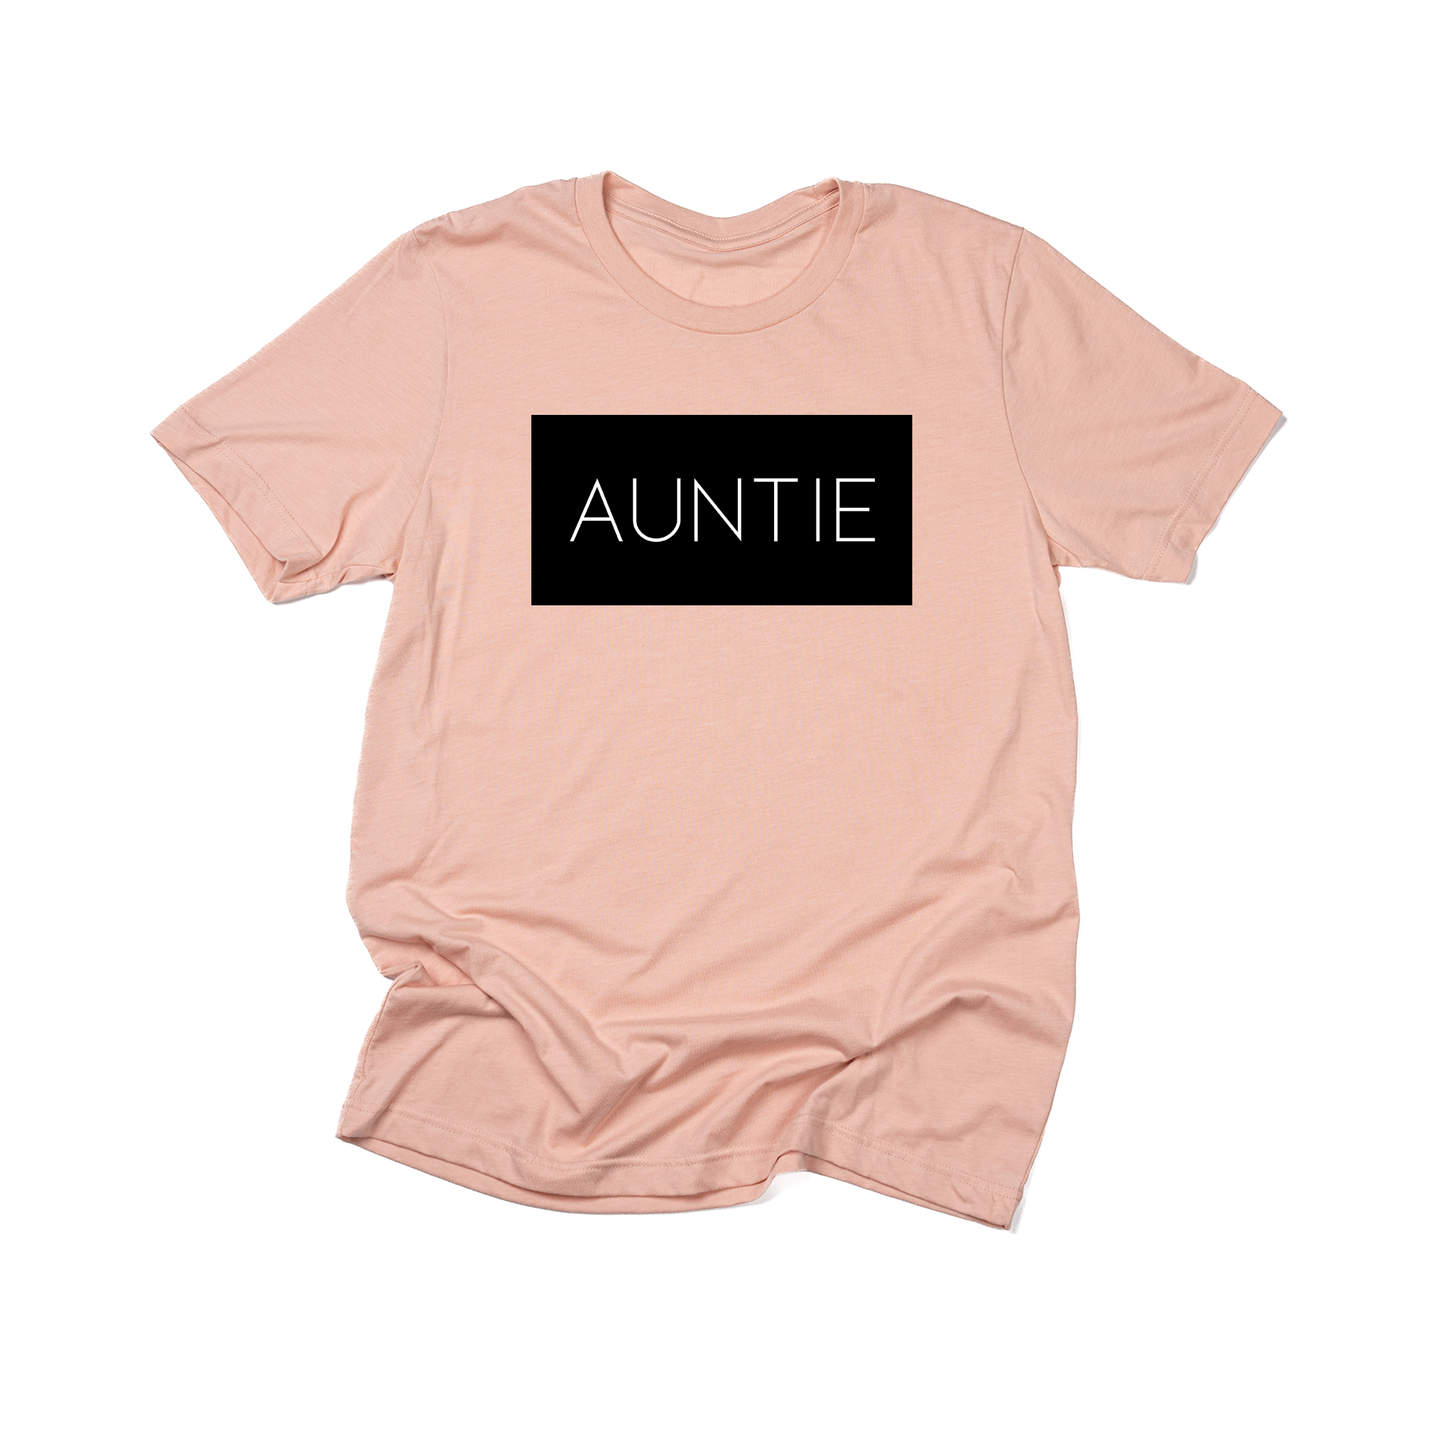 Auntie (Boxed Collection, Black Box/White Text, Across Front) - Tee (Peach)